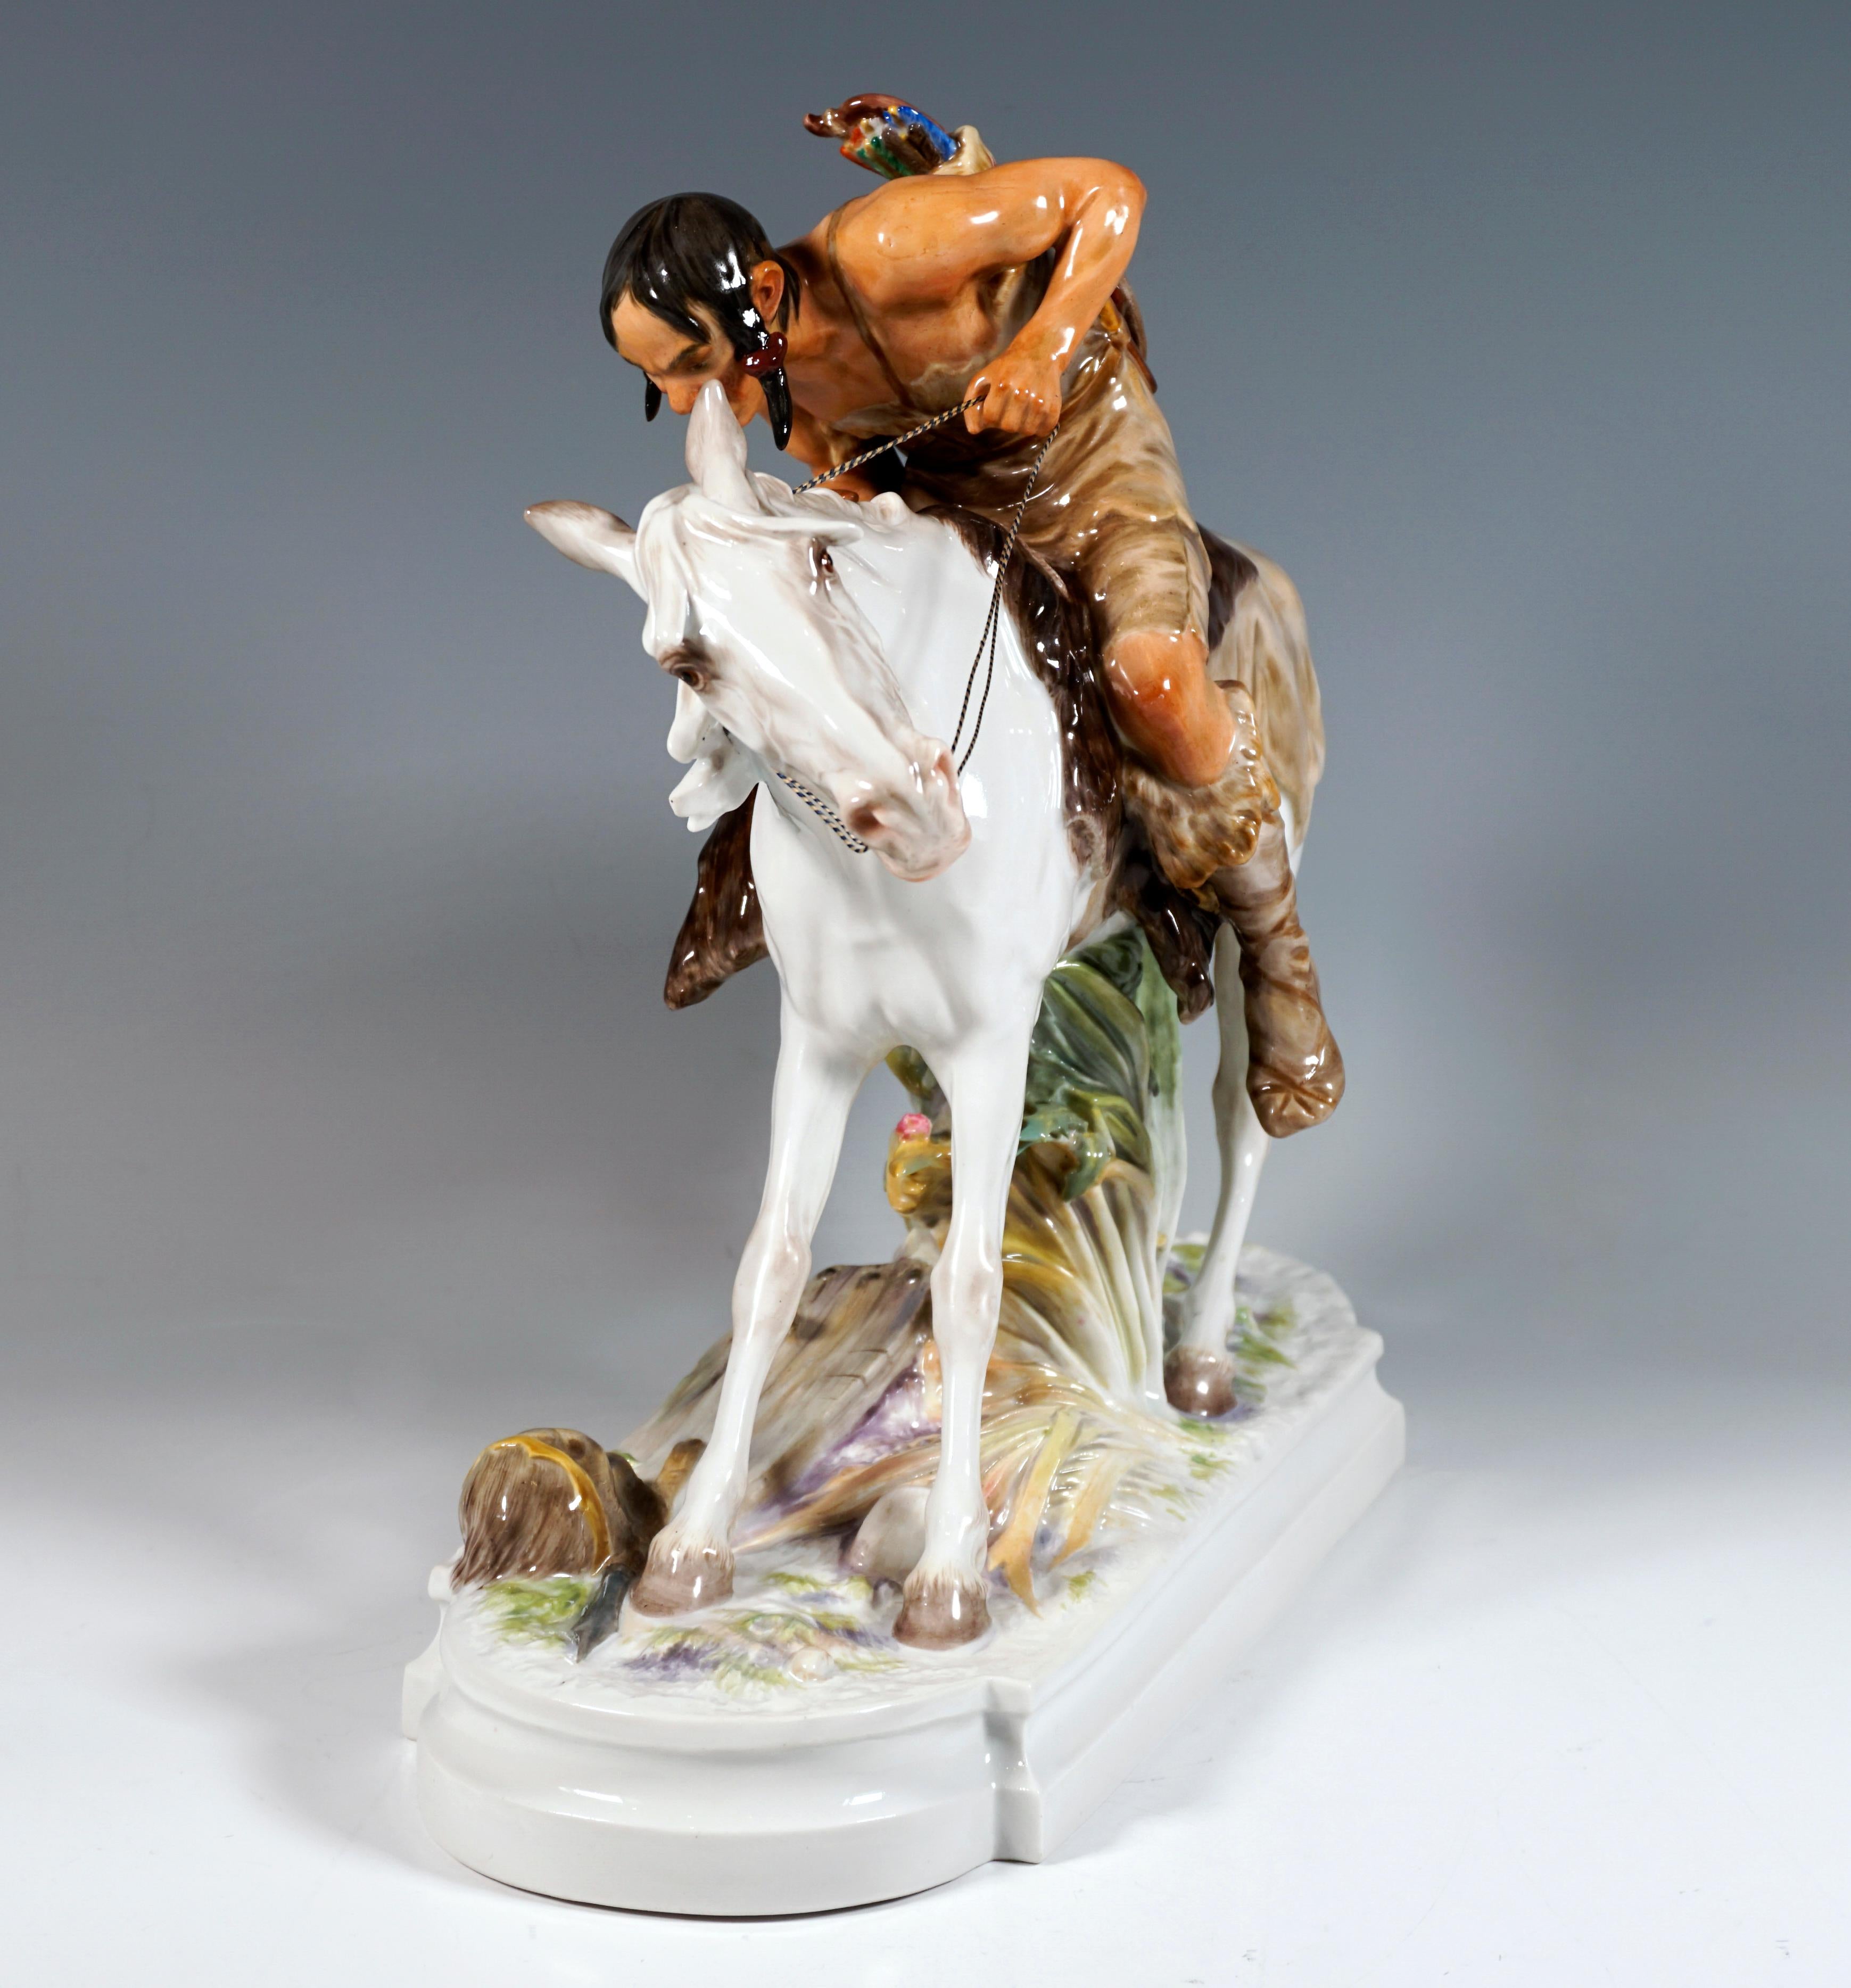 Hand-Crafted Art Nouveau Porcelain Group 'Hun On Horseback', by E. Hoesel, Meissen Germany